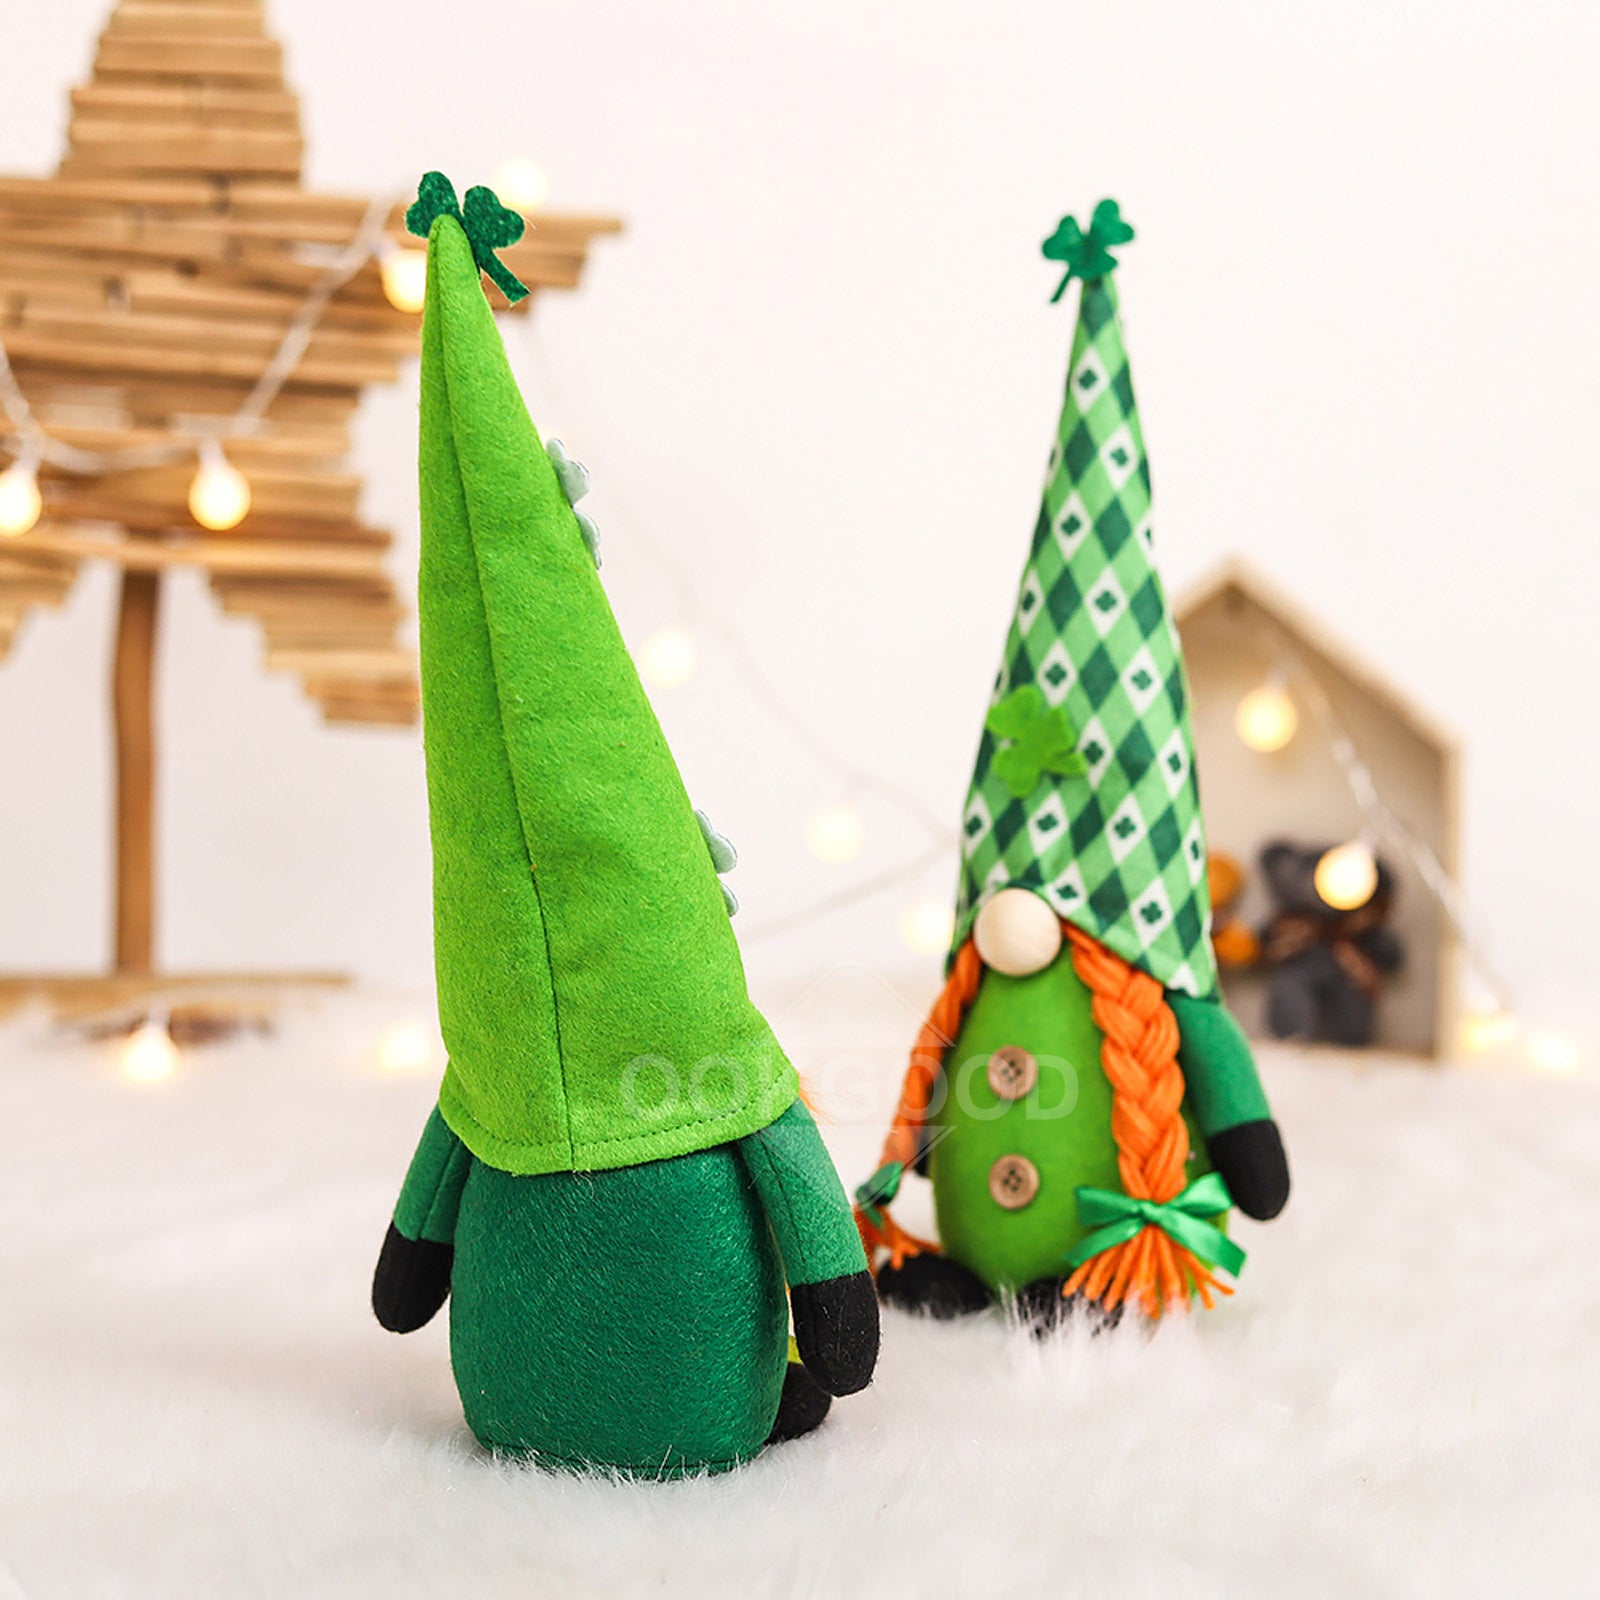 Handmade Green Gnome Doll Couple For St. Patrick's Day Gift